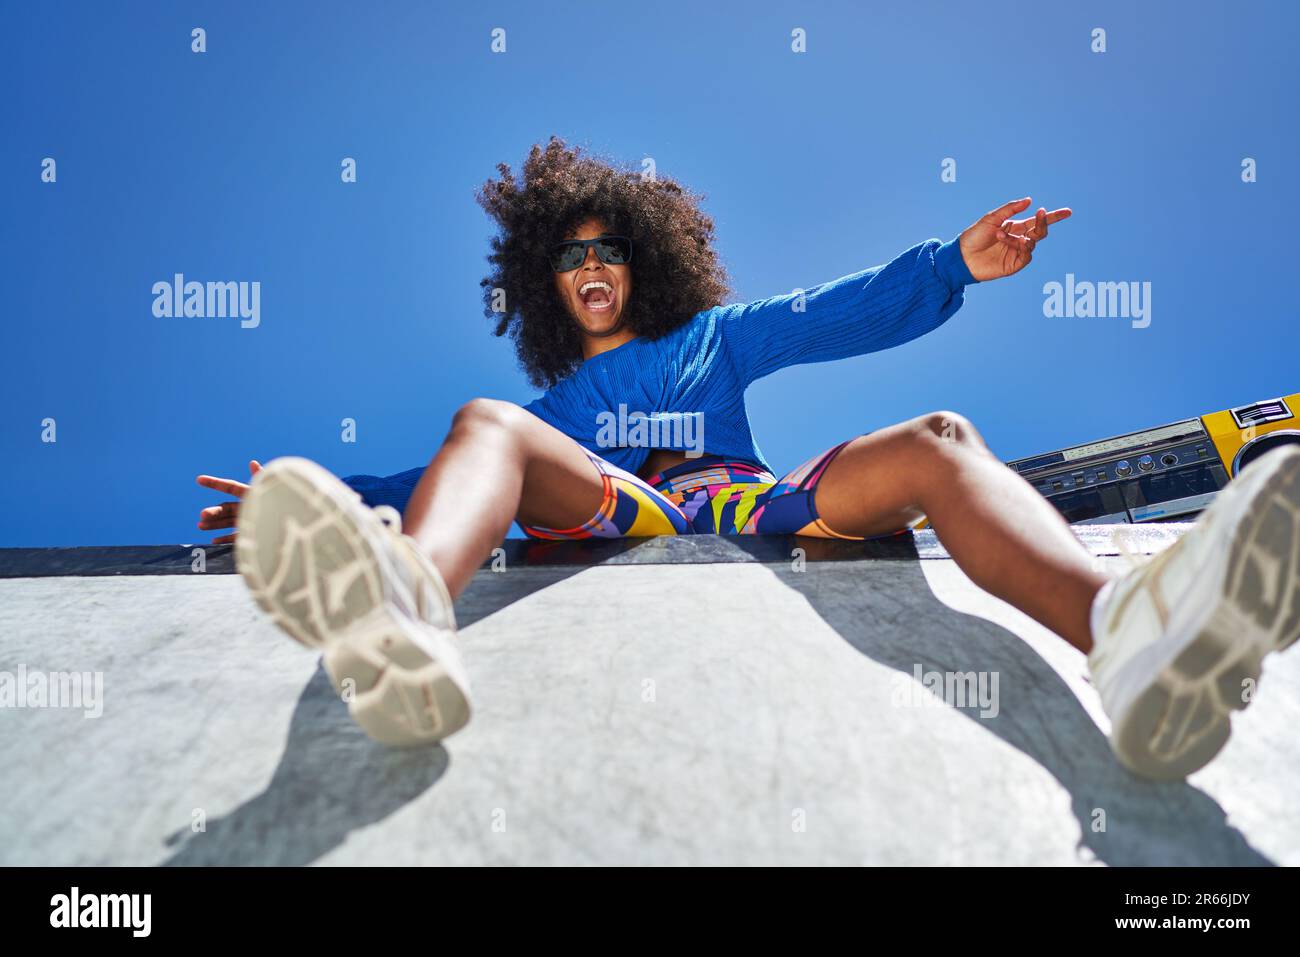 Portrait carefree young woman cheering at sunny sports ramp Stock Photo